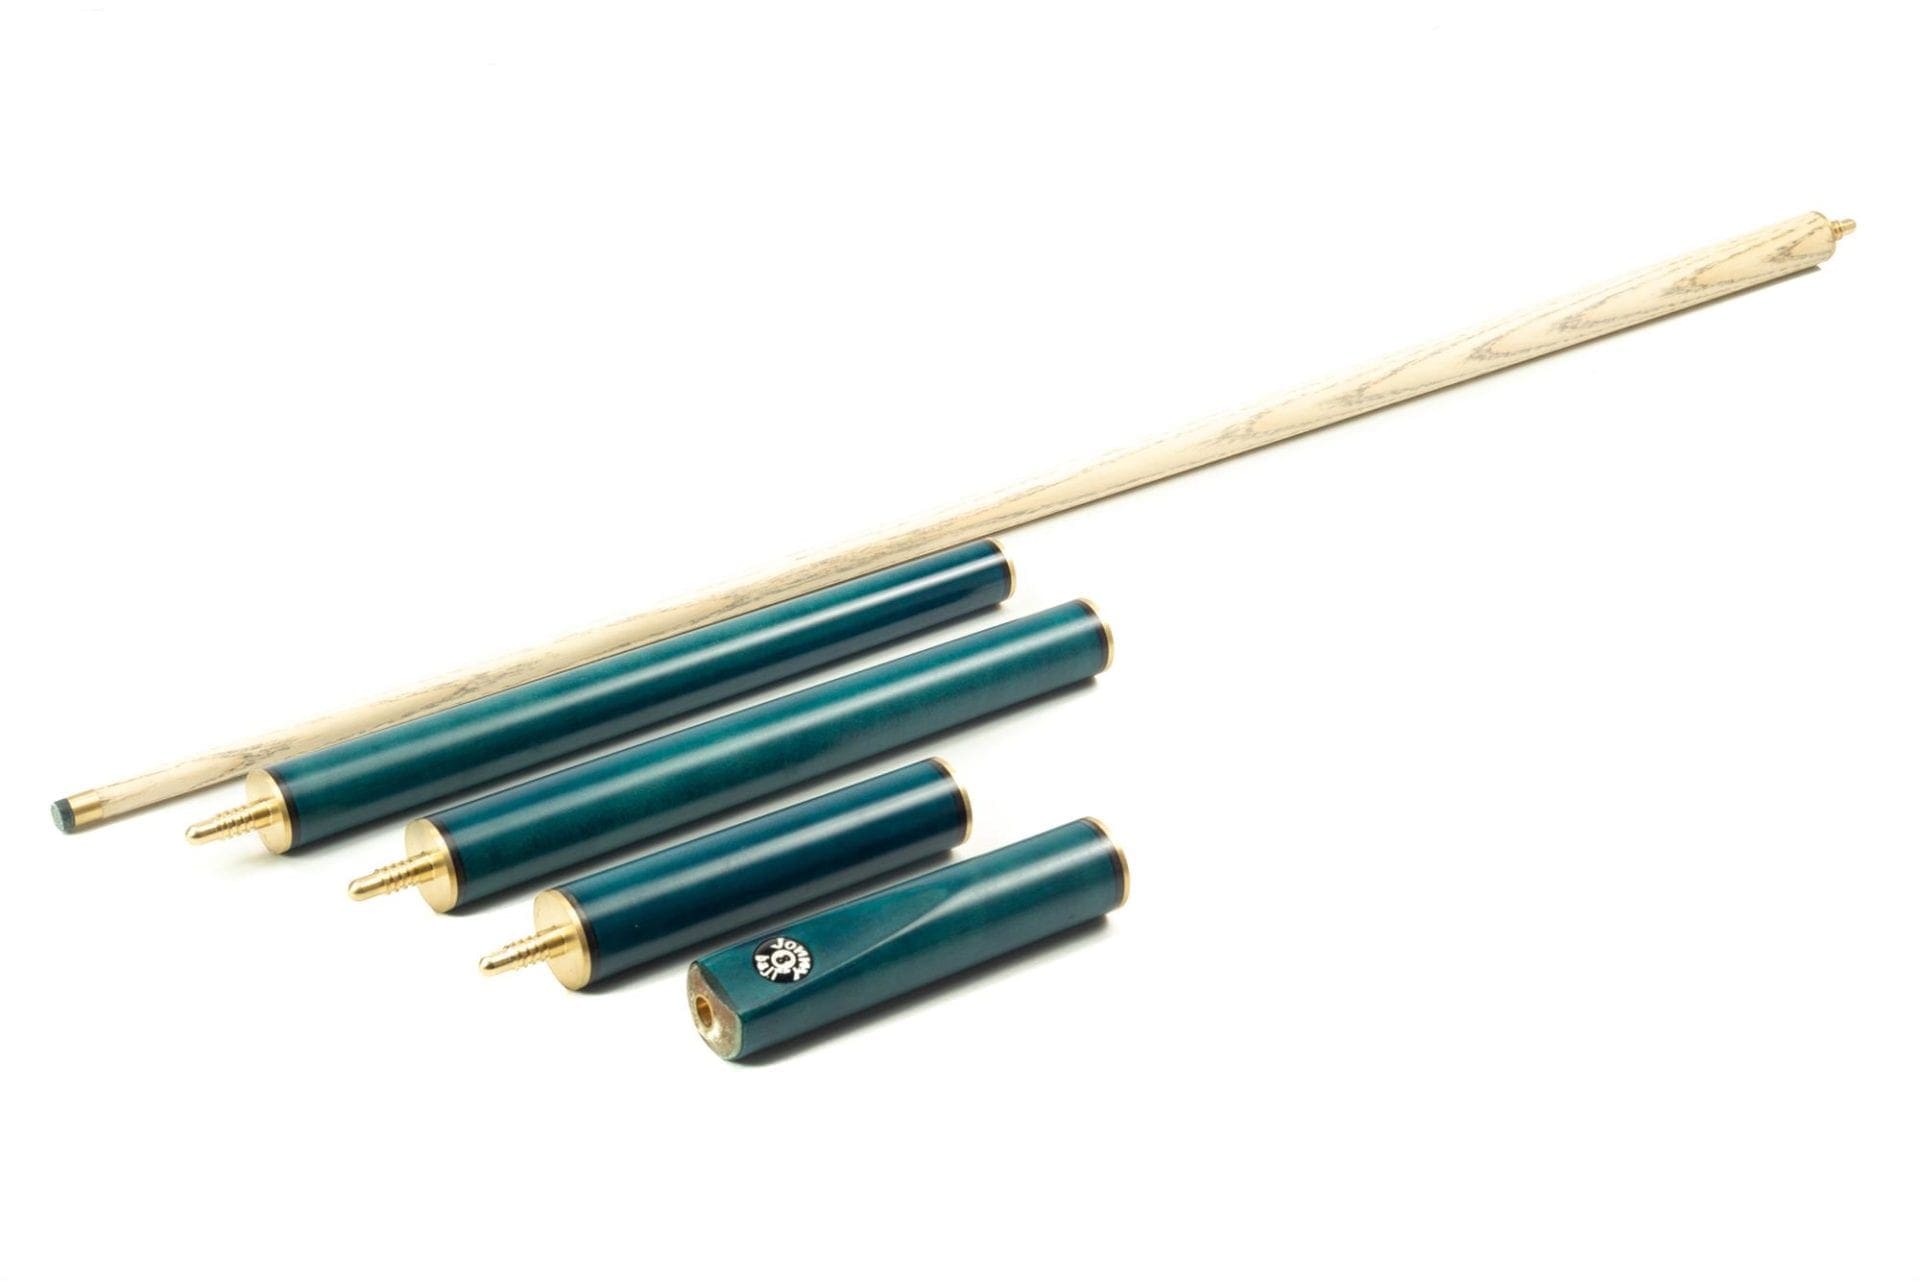 5 PC TURQUOISE ADJUSTABLE ASH POOL SNOOKER CUE WITH 9mm TIP 